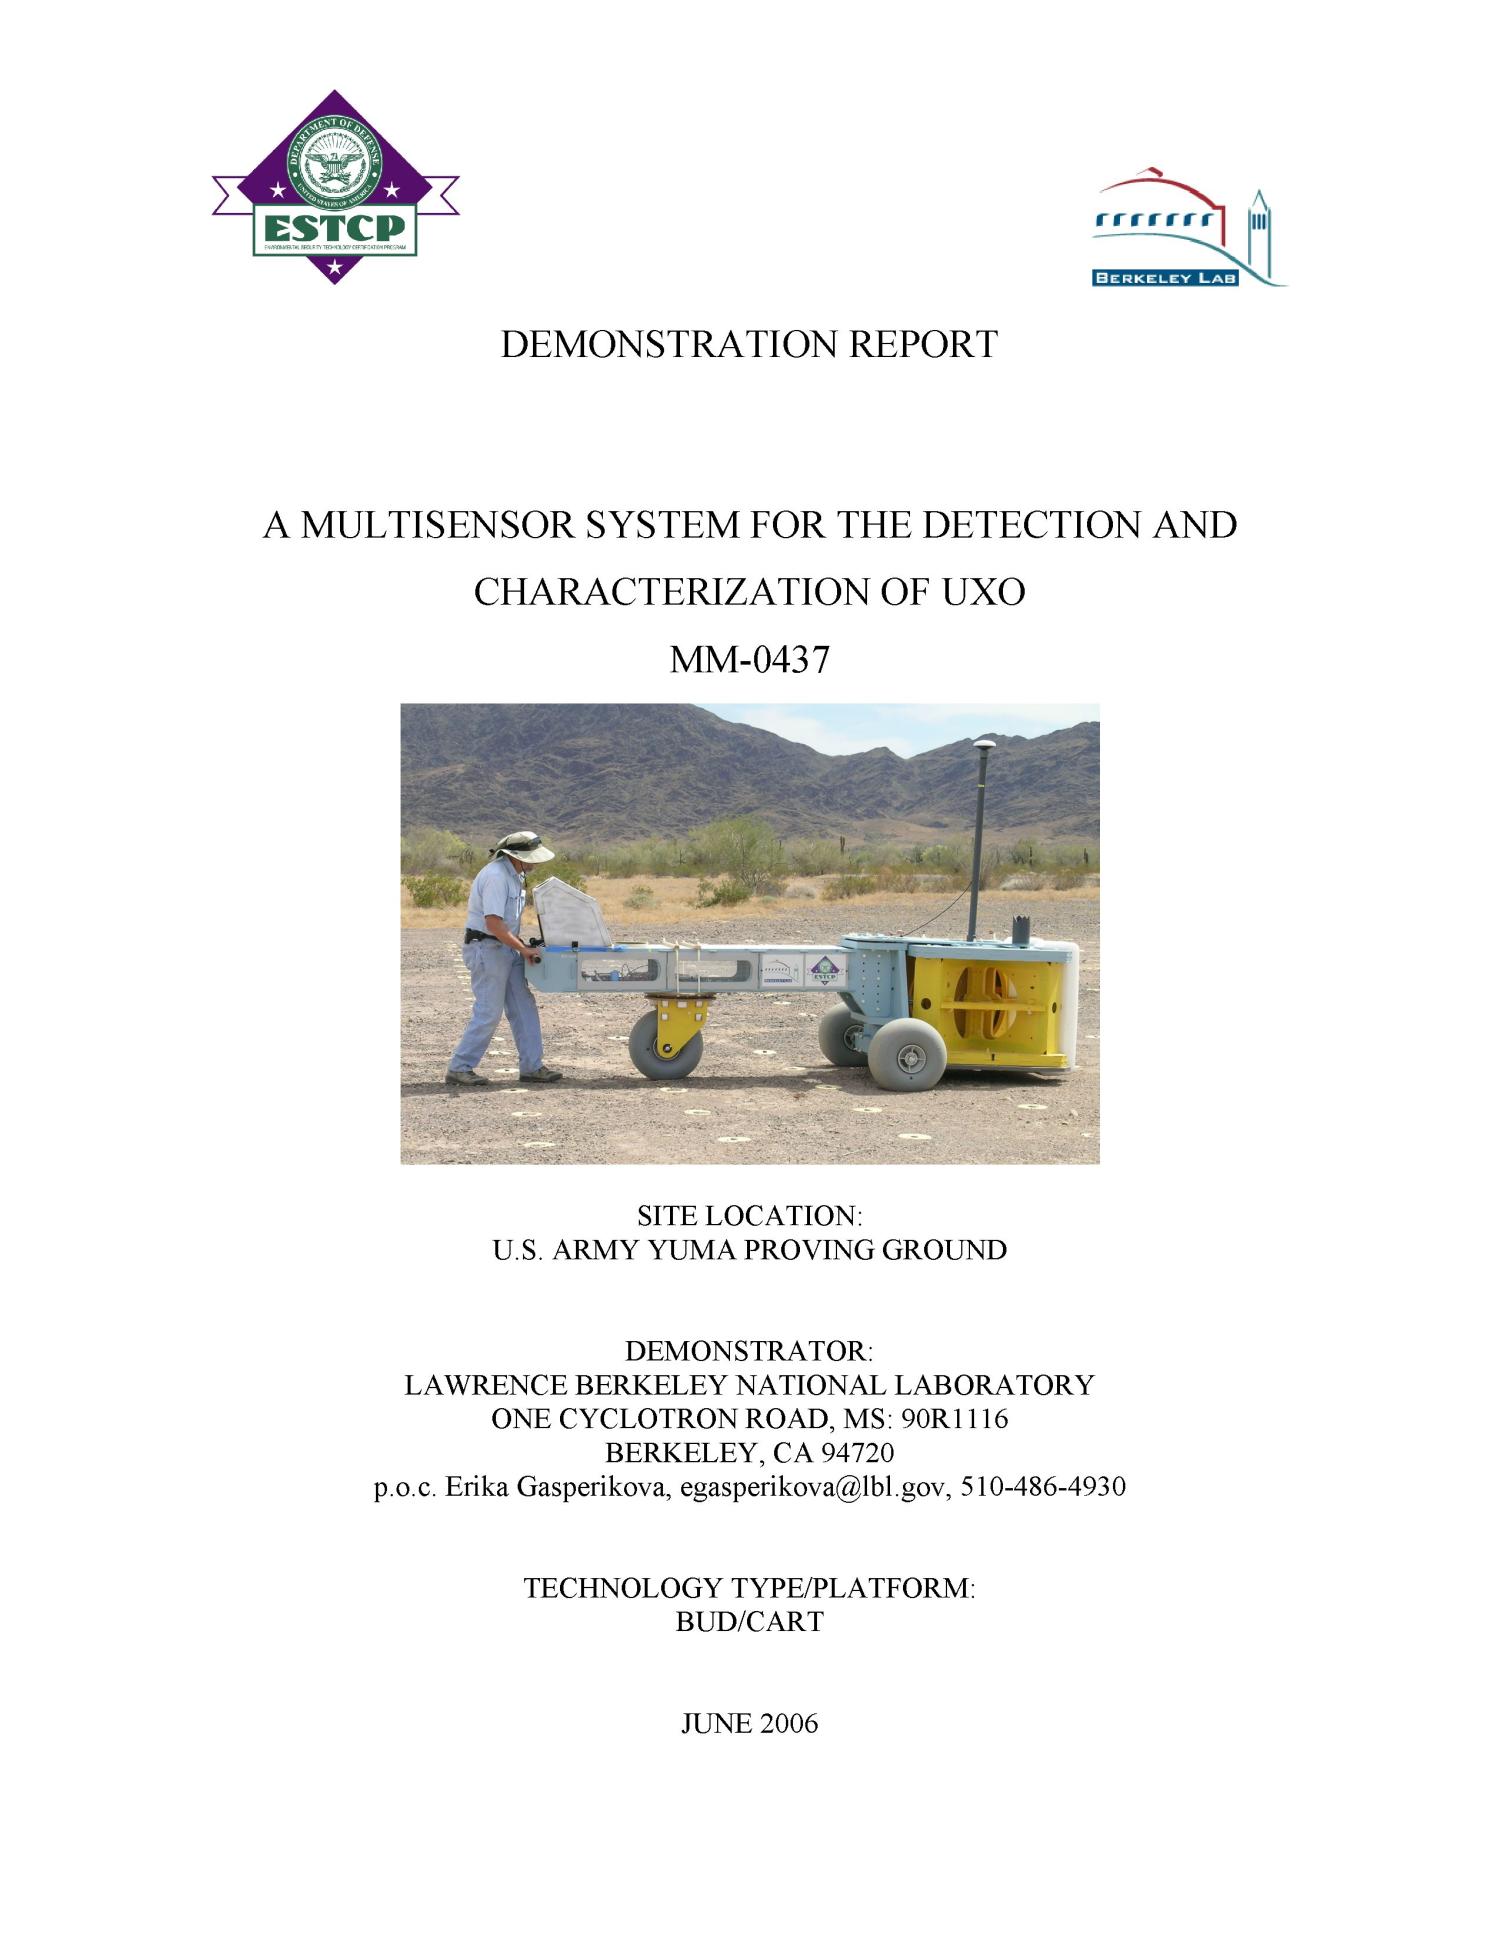 A multisensor system for detection and characterization of UXO(MM-0437) - Demonstration Report
                                                
                                                    [Sequence #]: 1 of 59
                                                